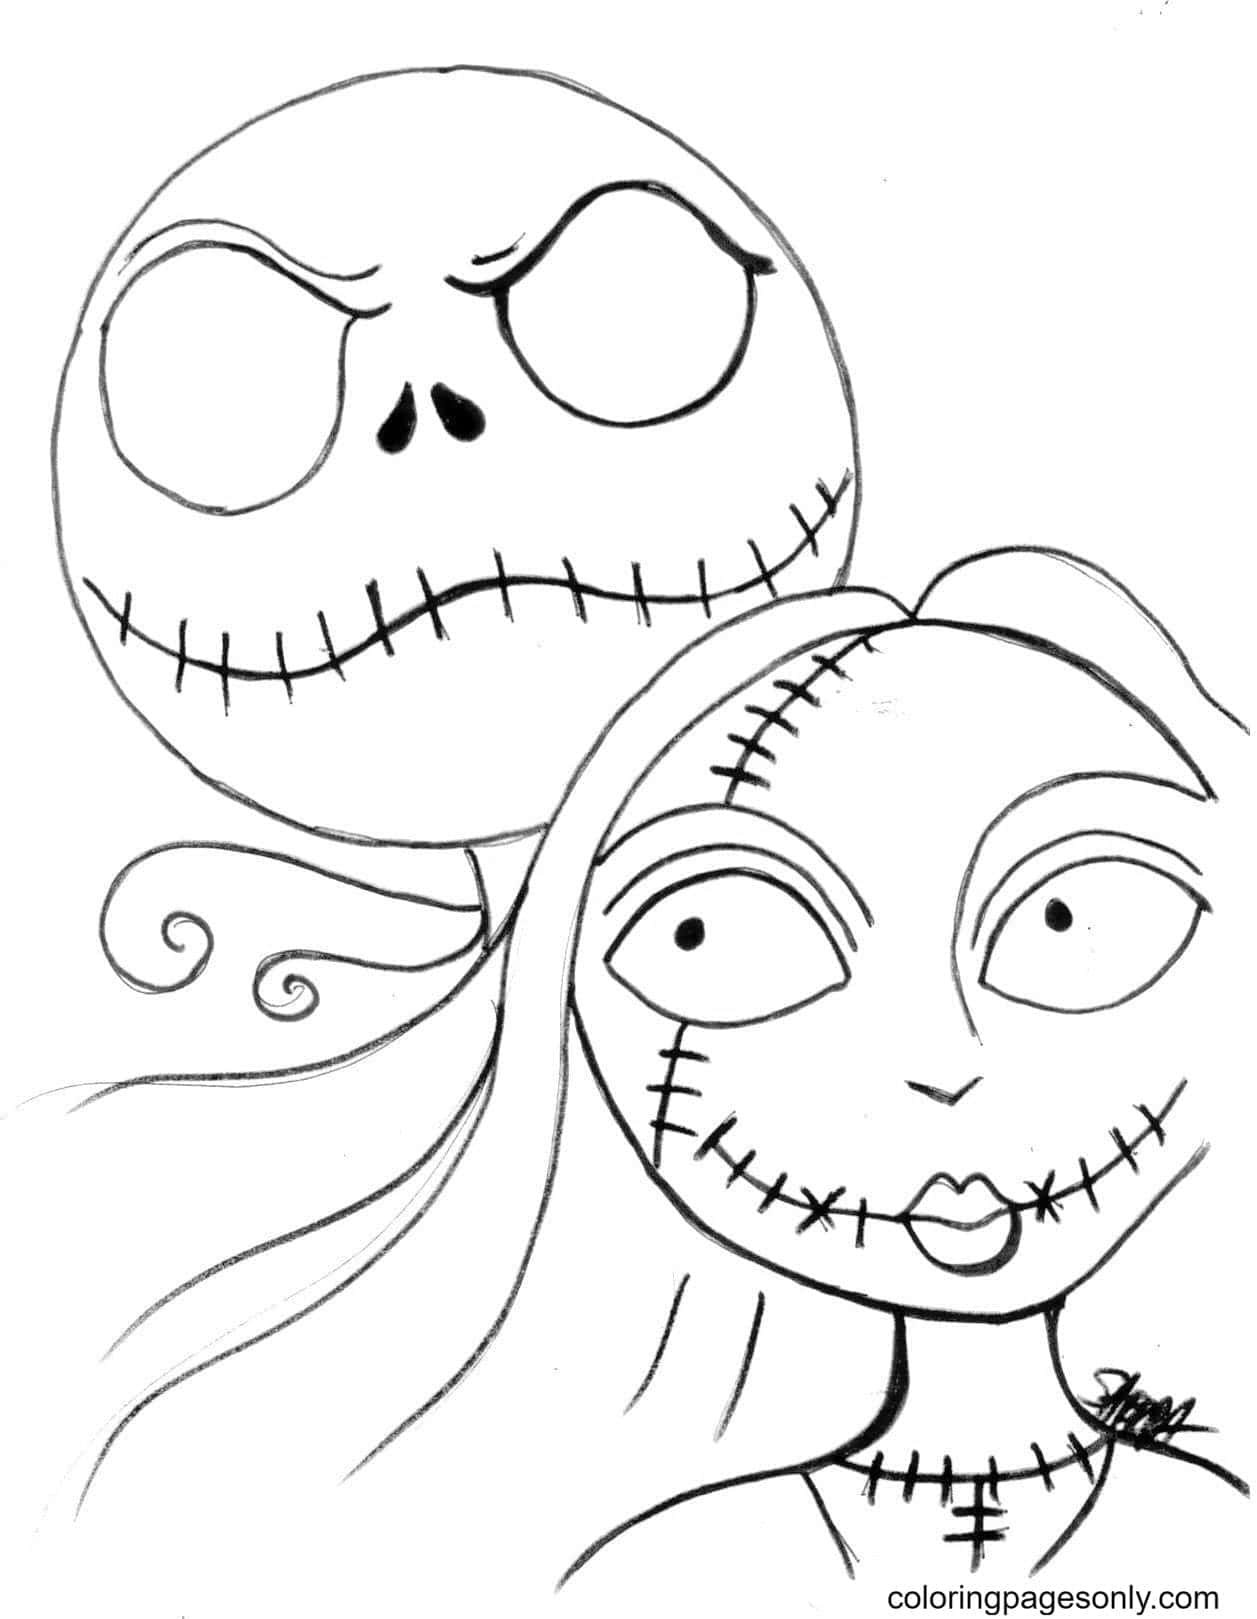 Disney's The Nightmare Before Christmas Coloring Book 100 Images